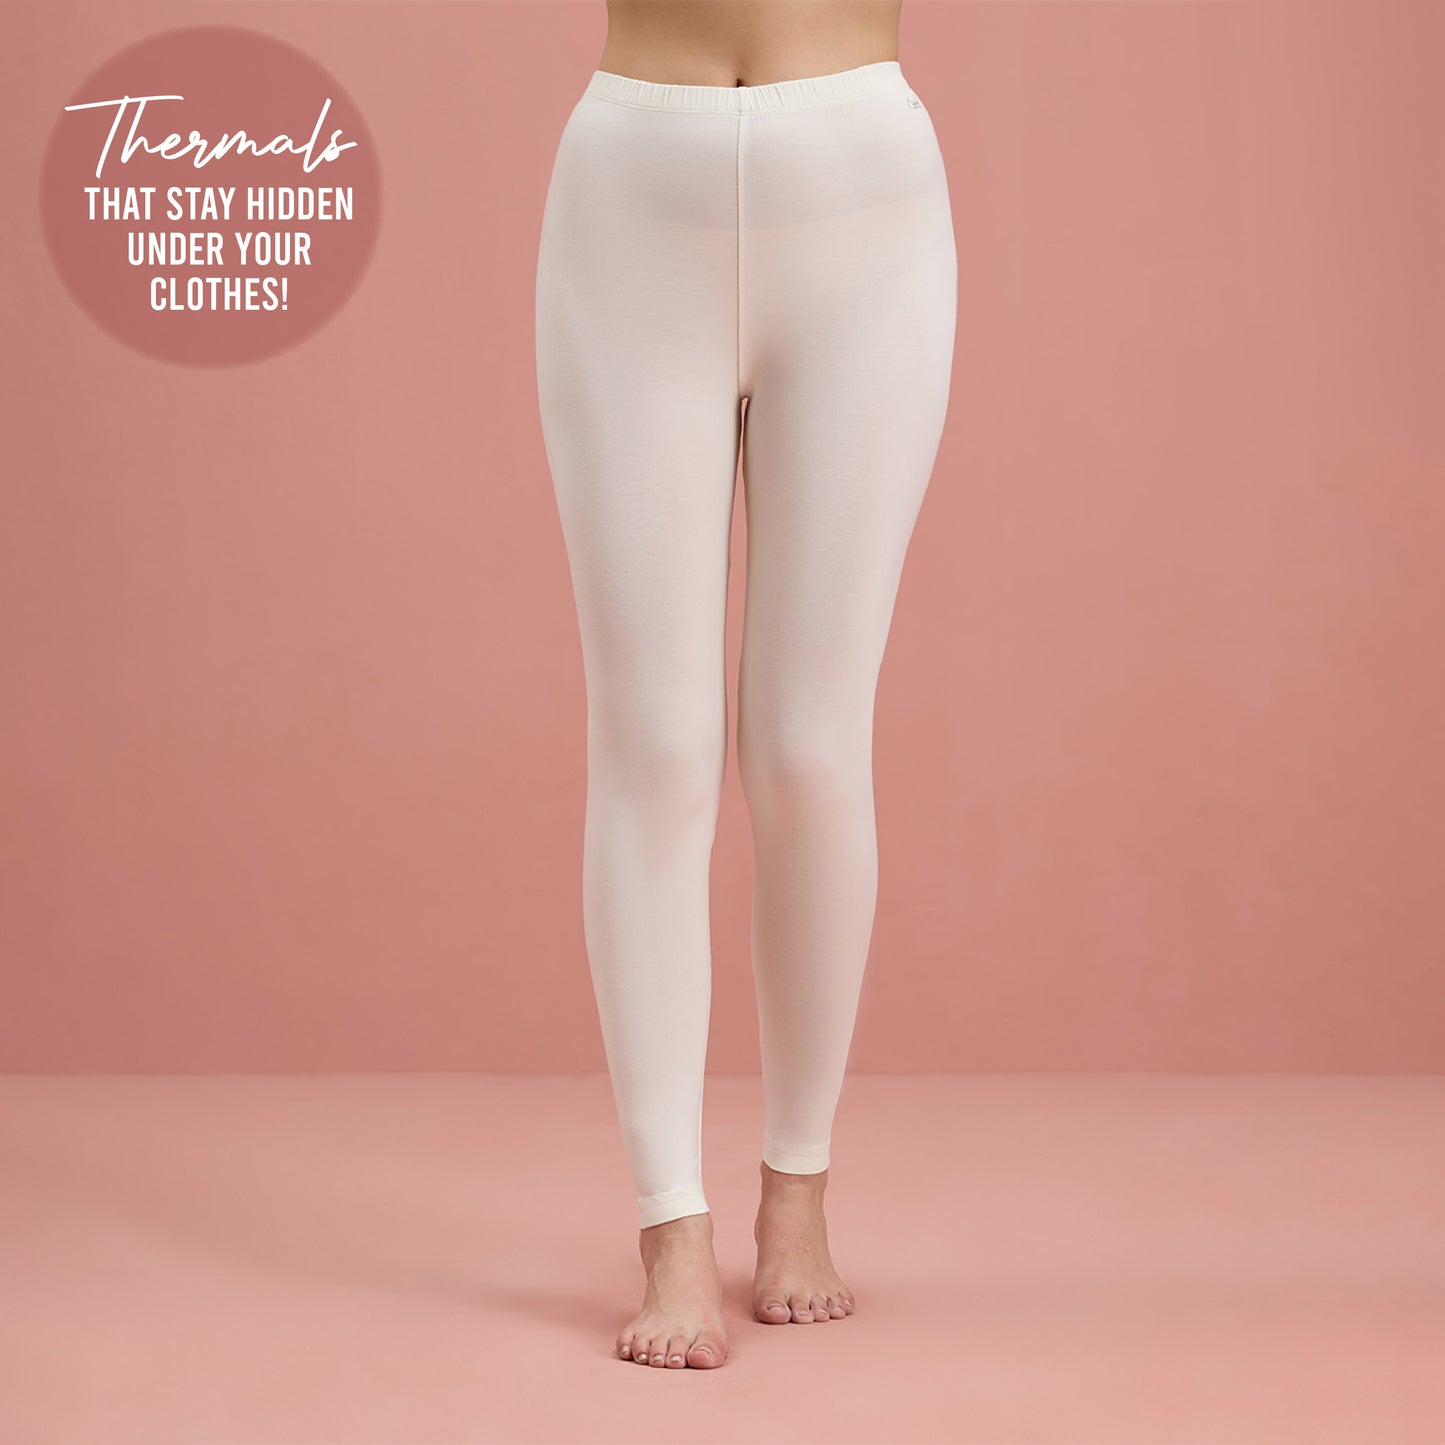 Ultra Light and Soft Thermal Leggings that stay hidden under clothes - NYOE06 White